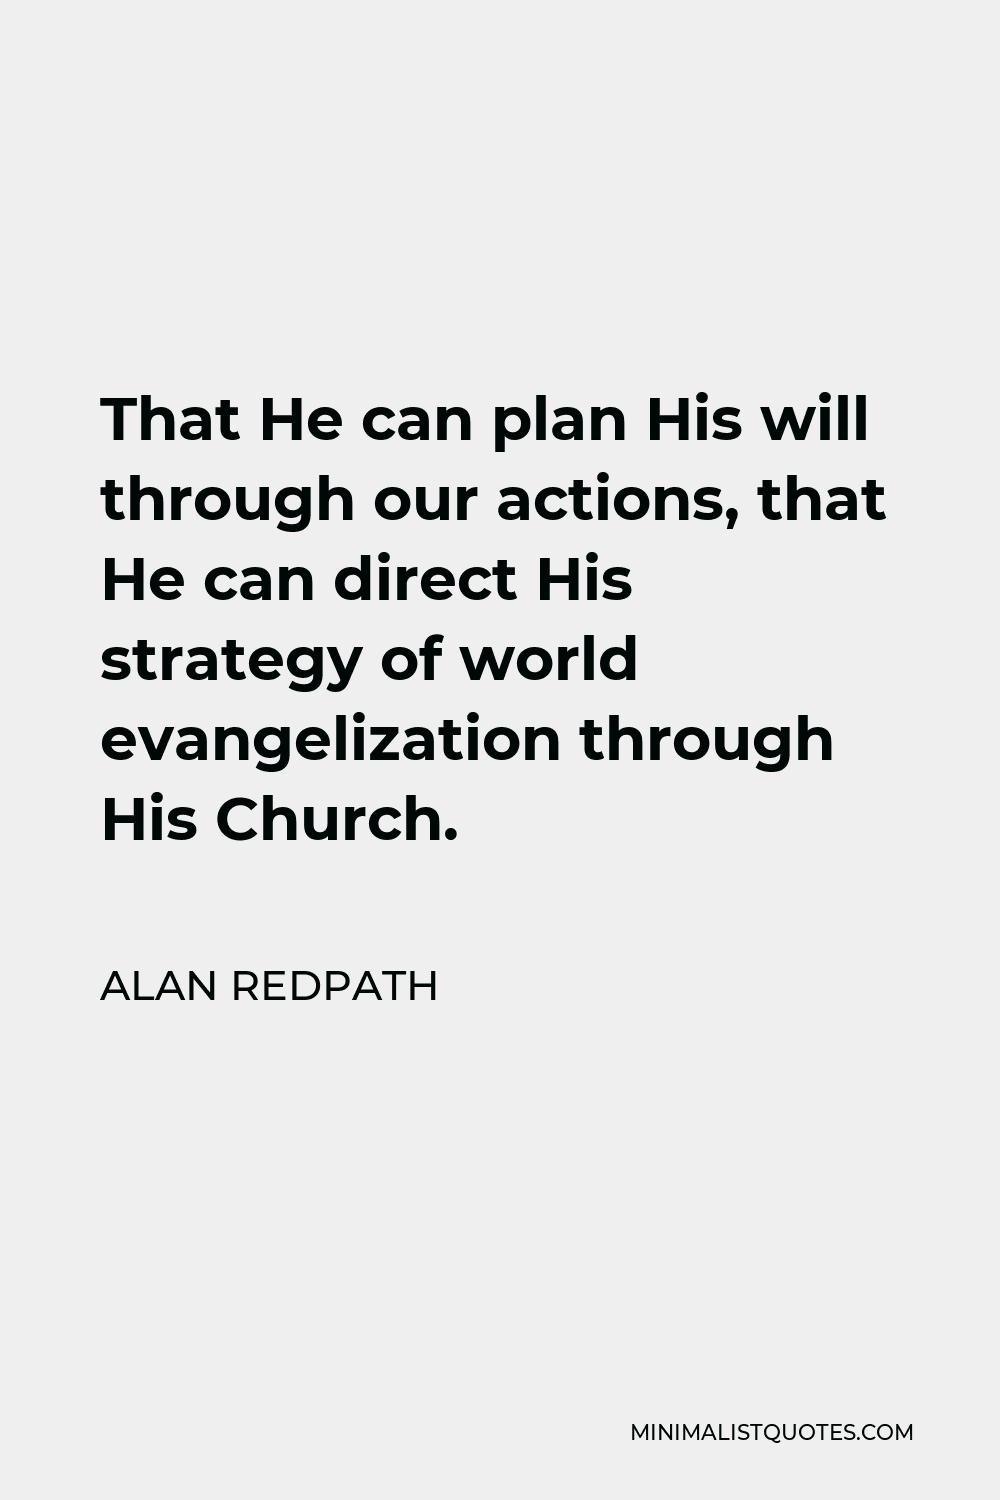 Alan Redpath Quote - That He can plan His will through our actions, that He can direct His strategy of world evangelization through His Church.